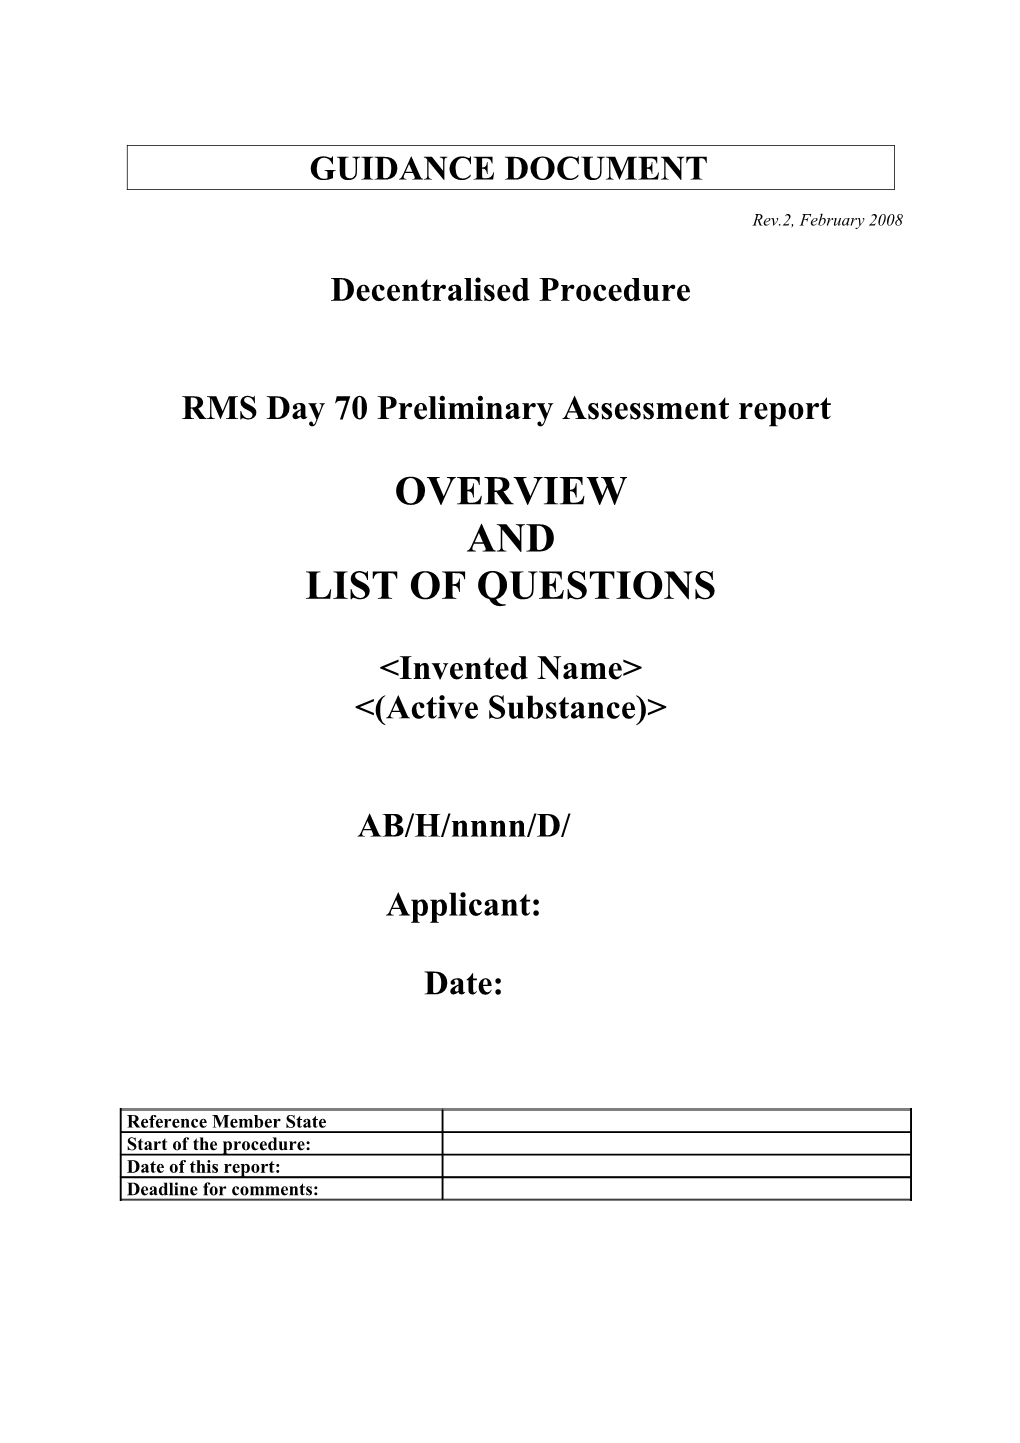 RMS Day 70 Preliminary Assessment Report